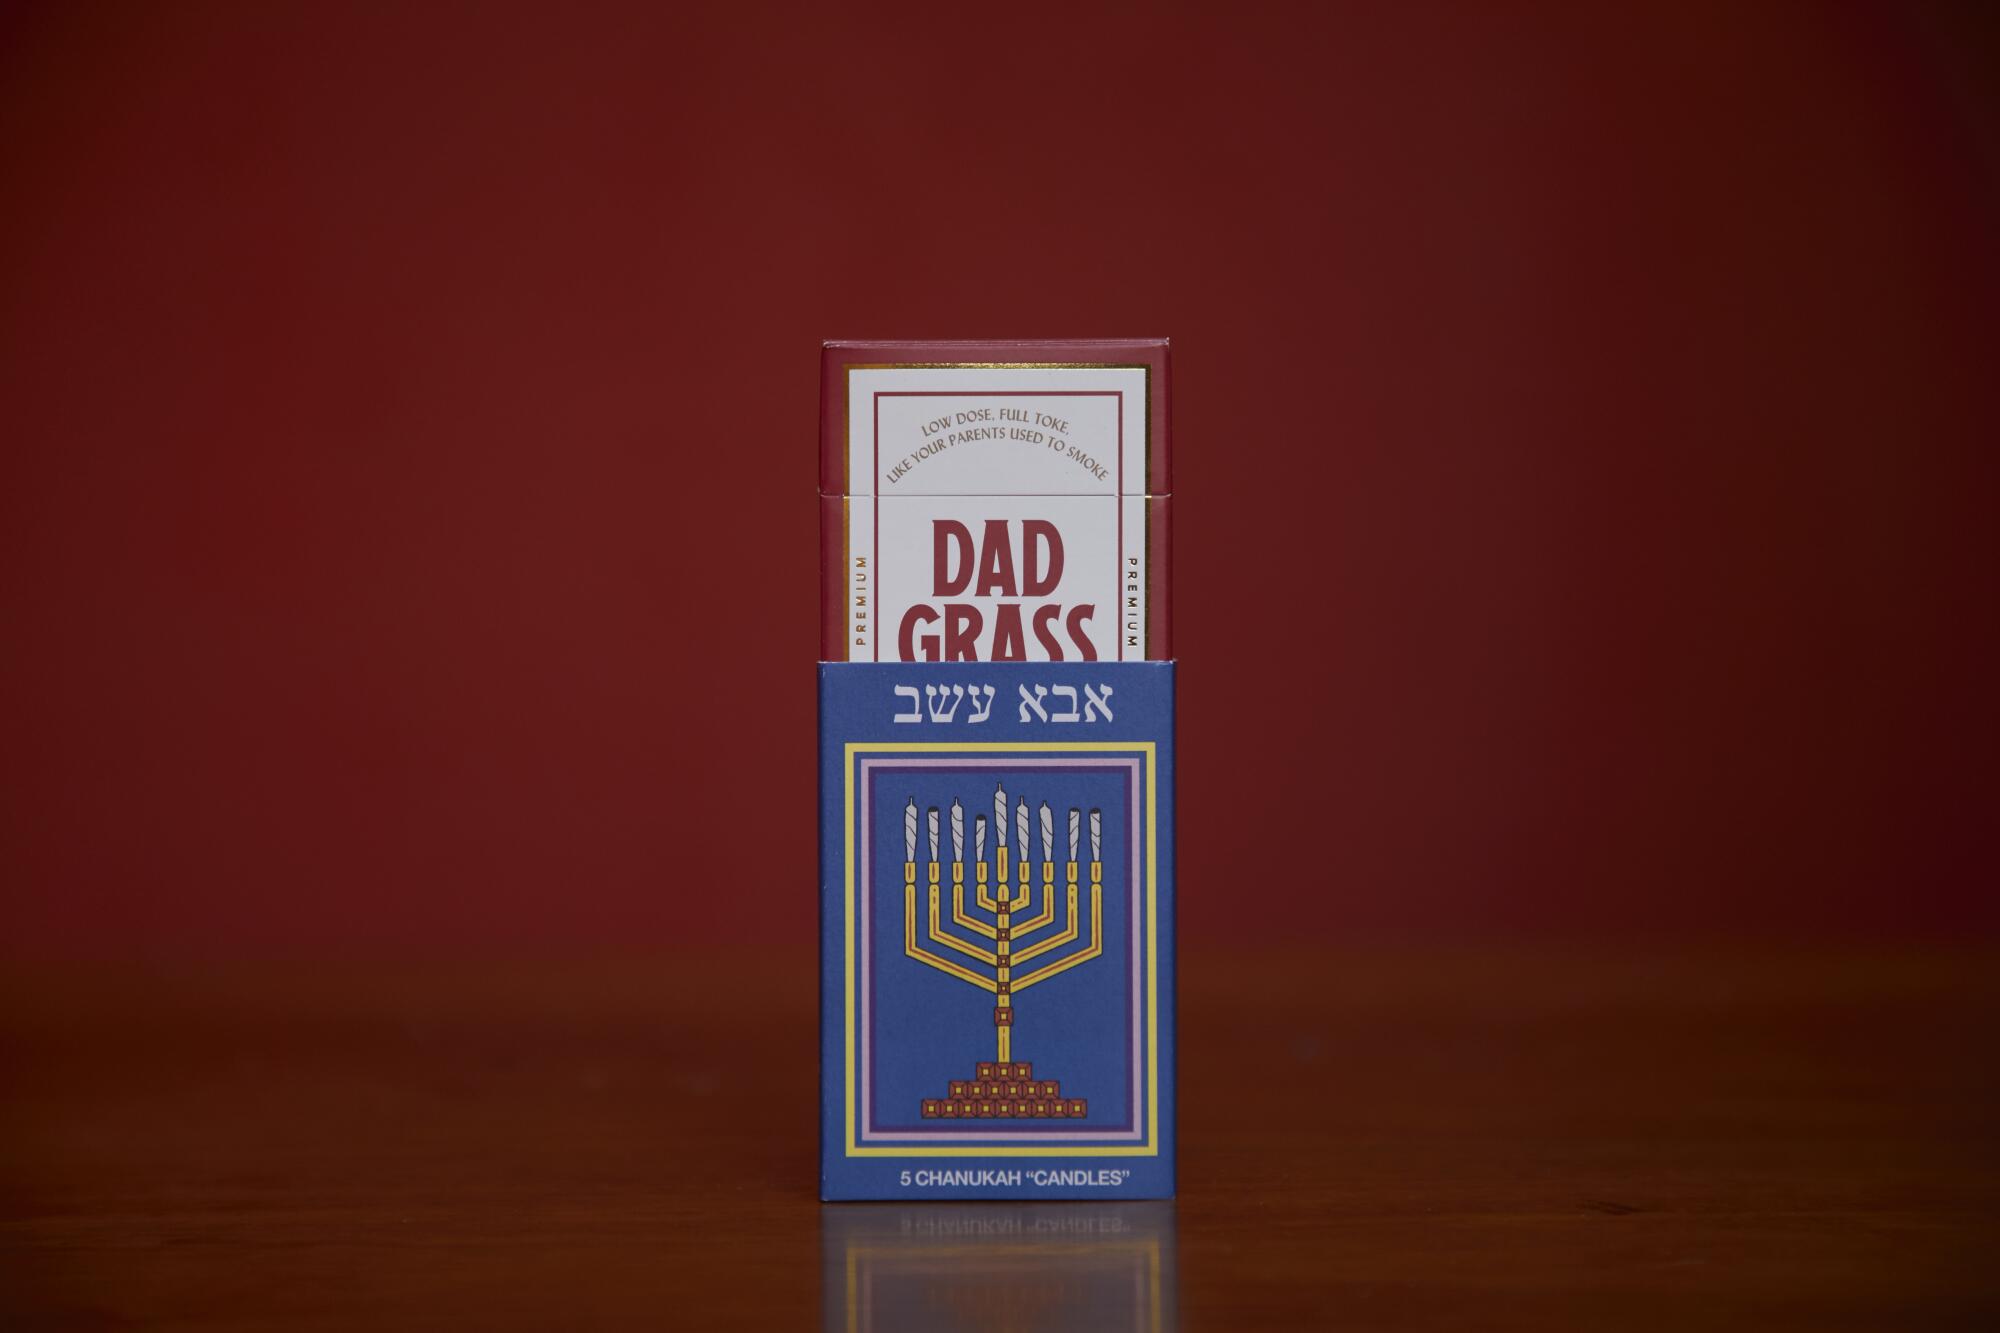 Dad Grass' pack of prerolls are camouflaged as a box of Hanukkah candles